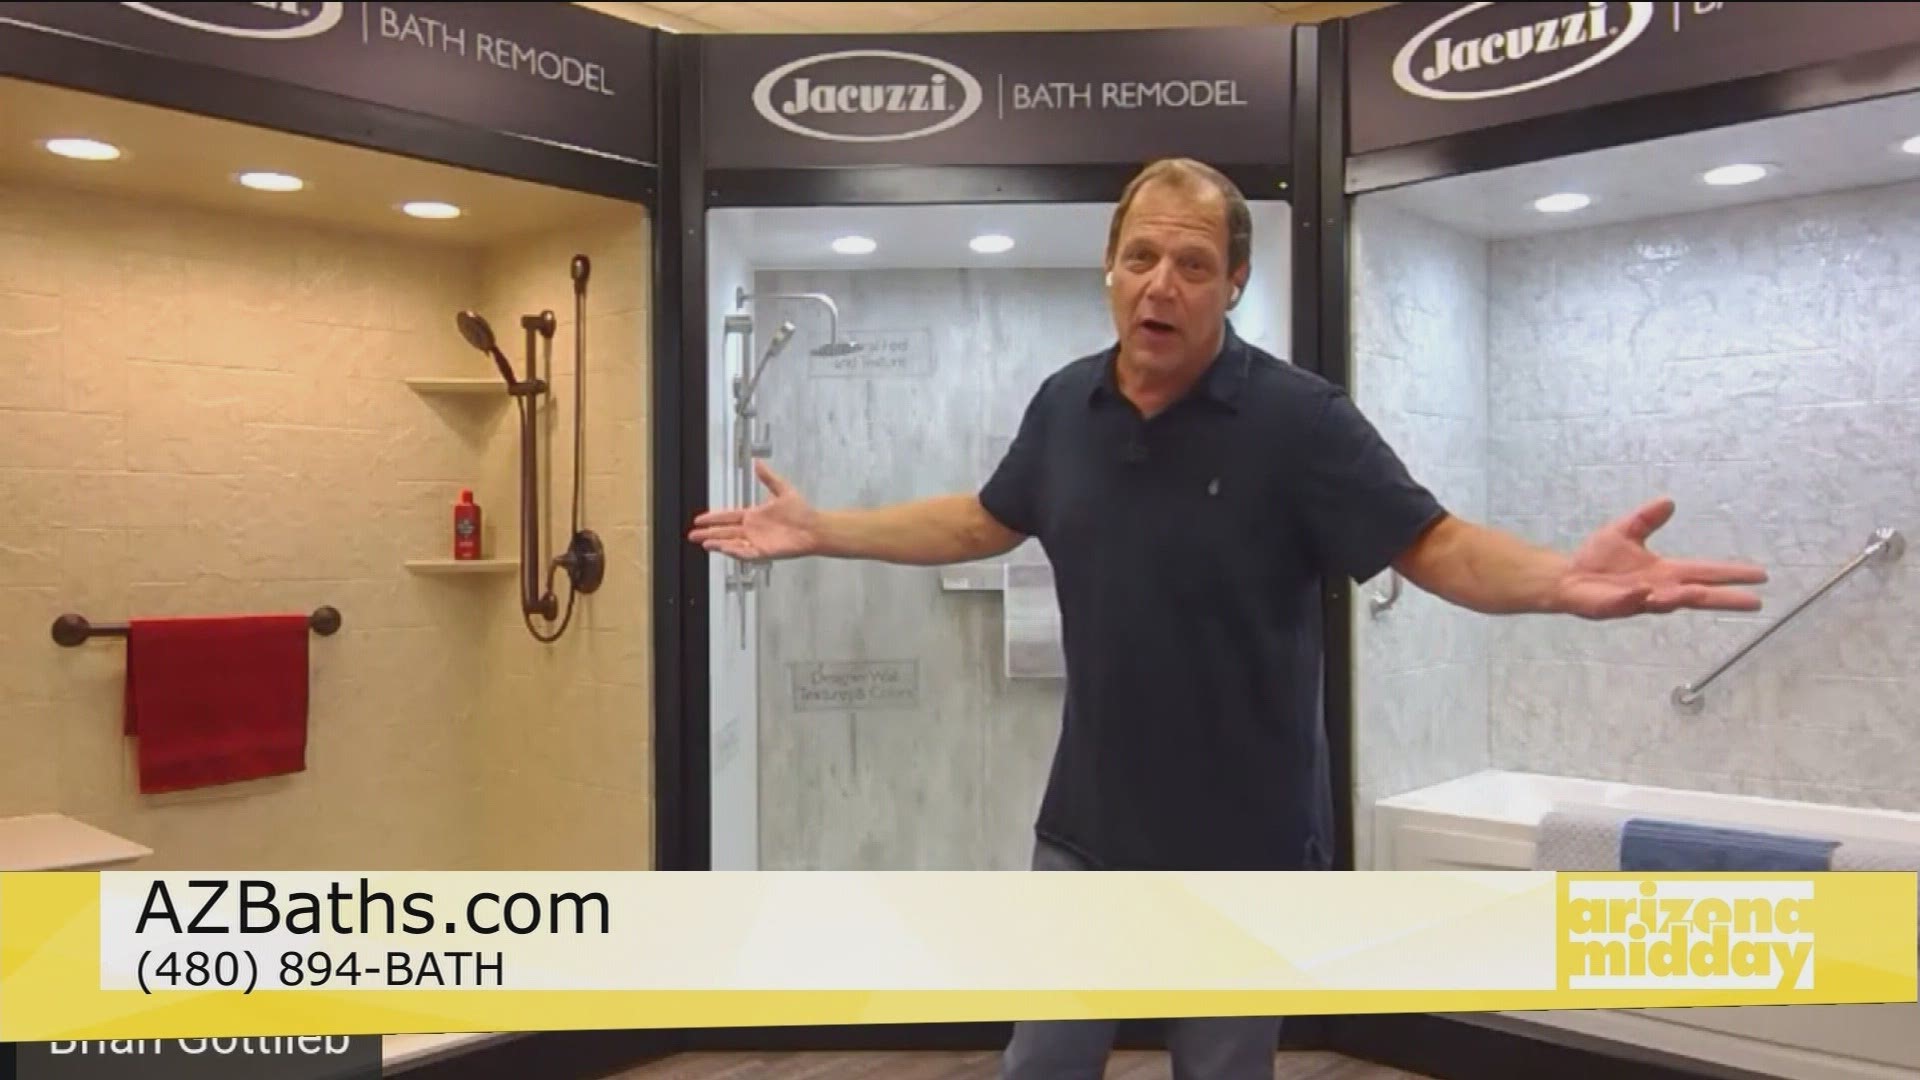 Brian Gottlieb with Jacuzzi Bath Remodel shows us some of the designs you can get that are easy to clean and how to get them for an amazing price